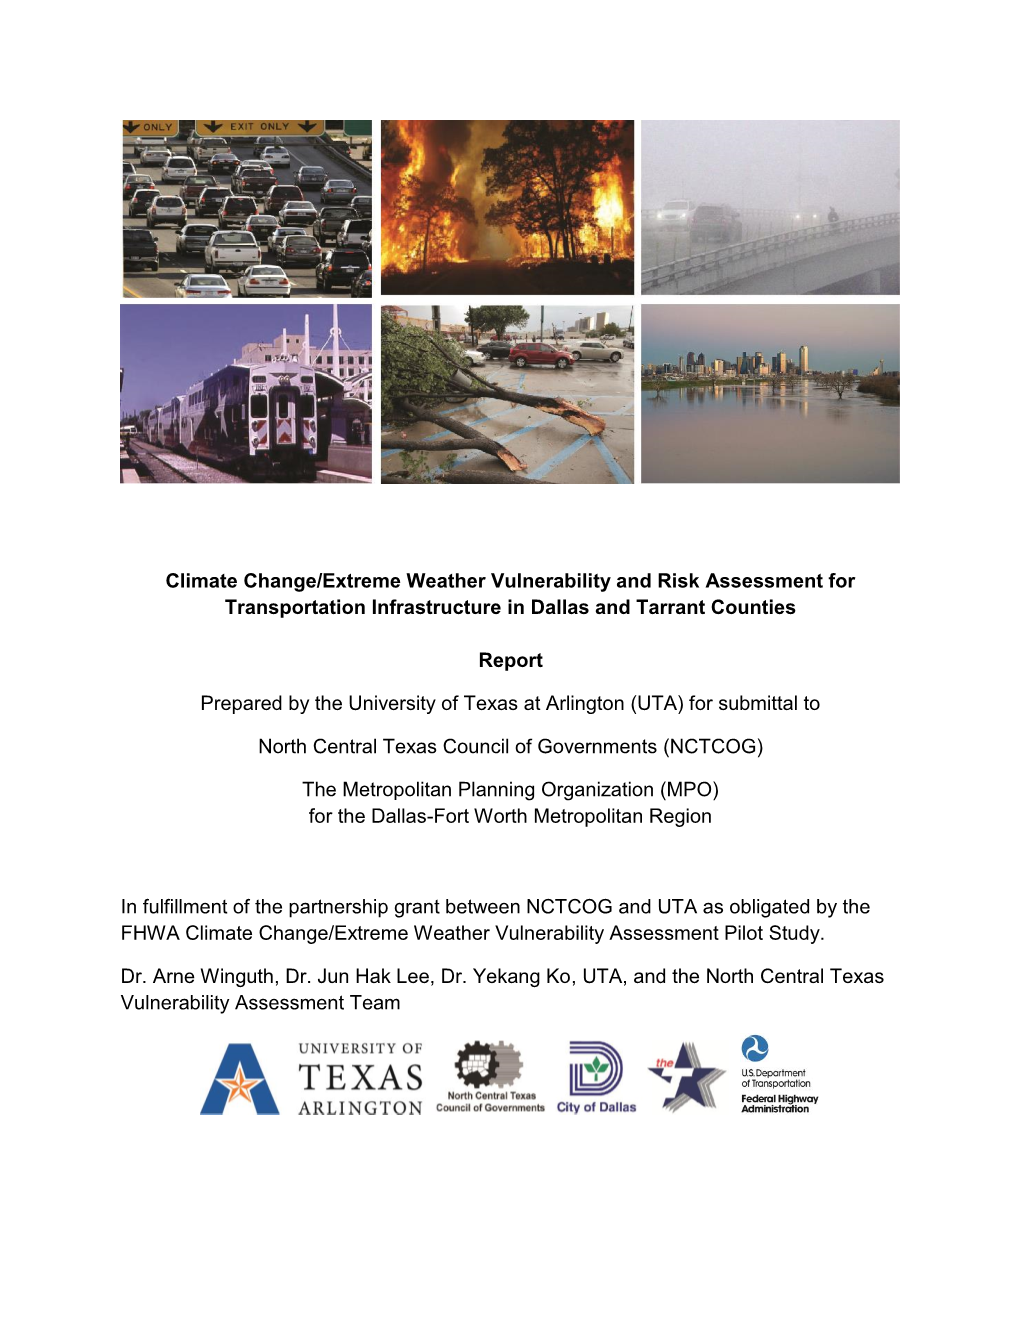 Climate Change/Extreme Weather Vulnerability and Risk Assessment for Transportation Infrastructure in Dallas and Tarrant Counties